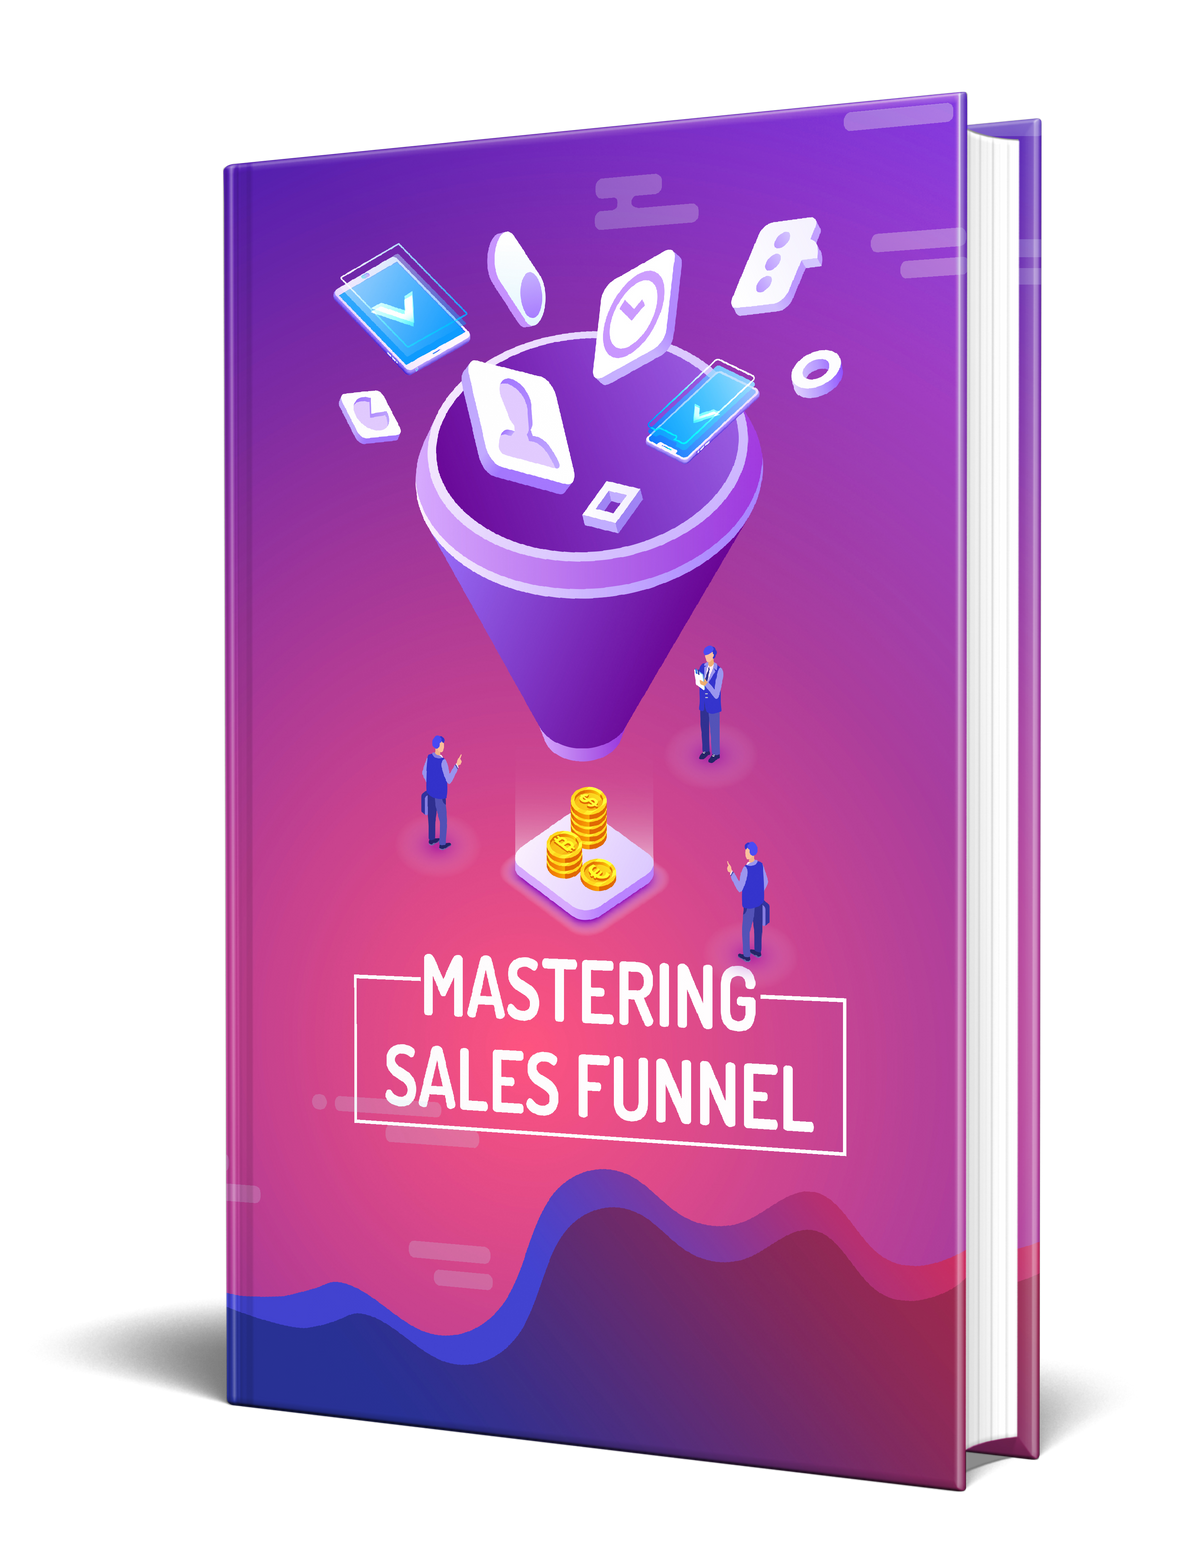 Mastering Sales Funnels for Your Business